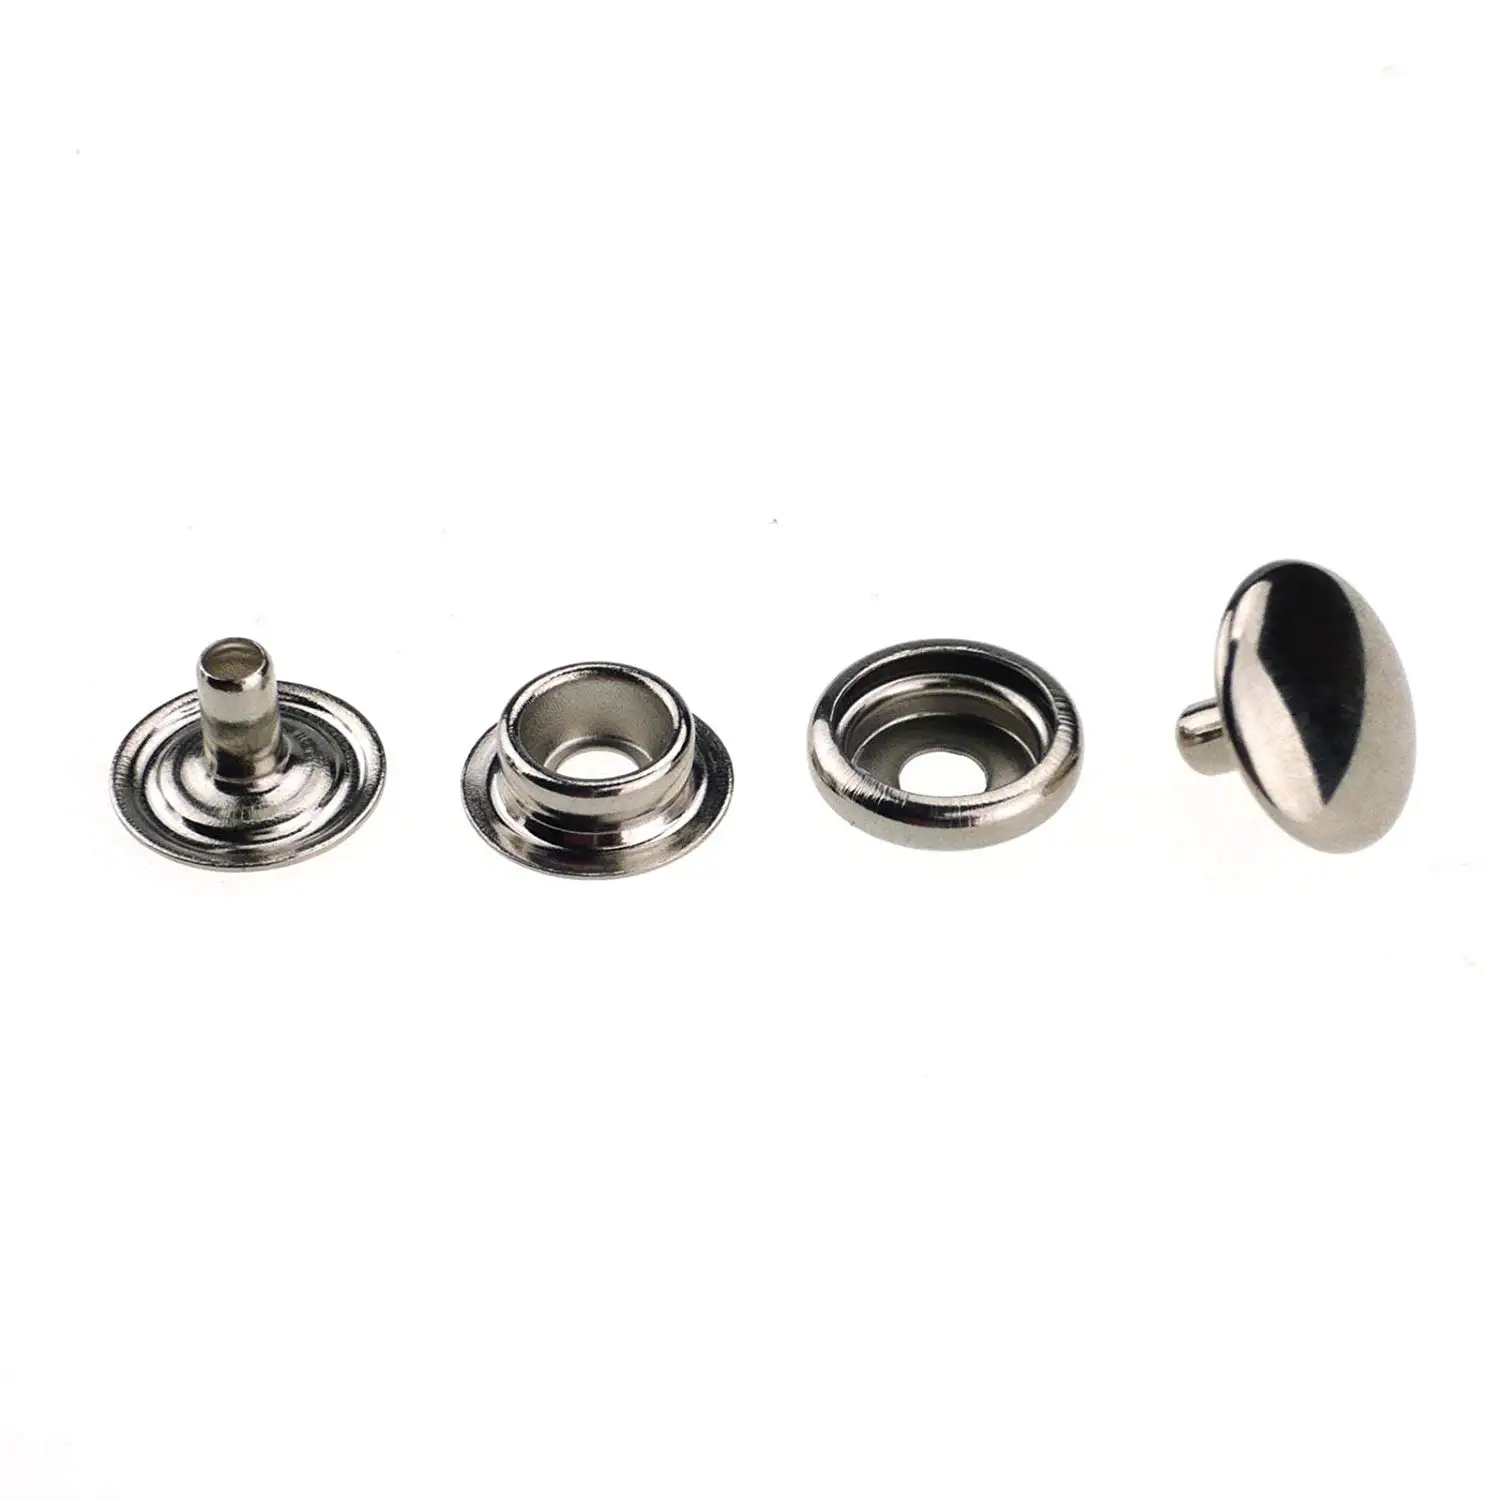 Jeans Popper for Clothes Repair 10 x 15mm Silver Snap Fastener Caps for Clothing and Accessories Straps and Other Sewing Projects Male Press Studs for Adding Secure Closure to Jackets Bags